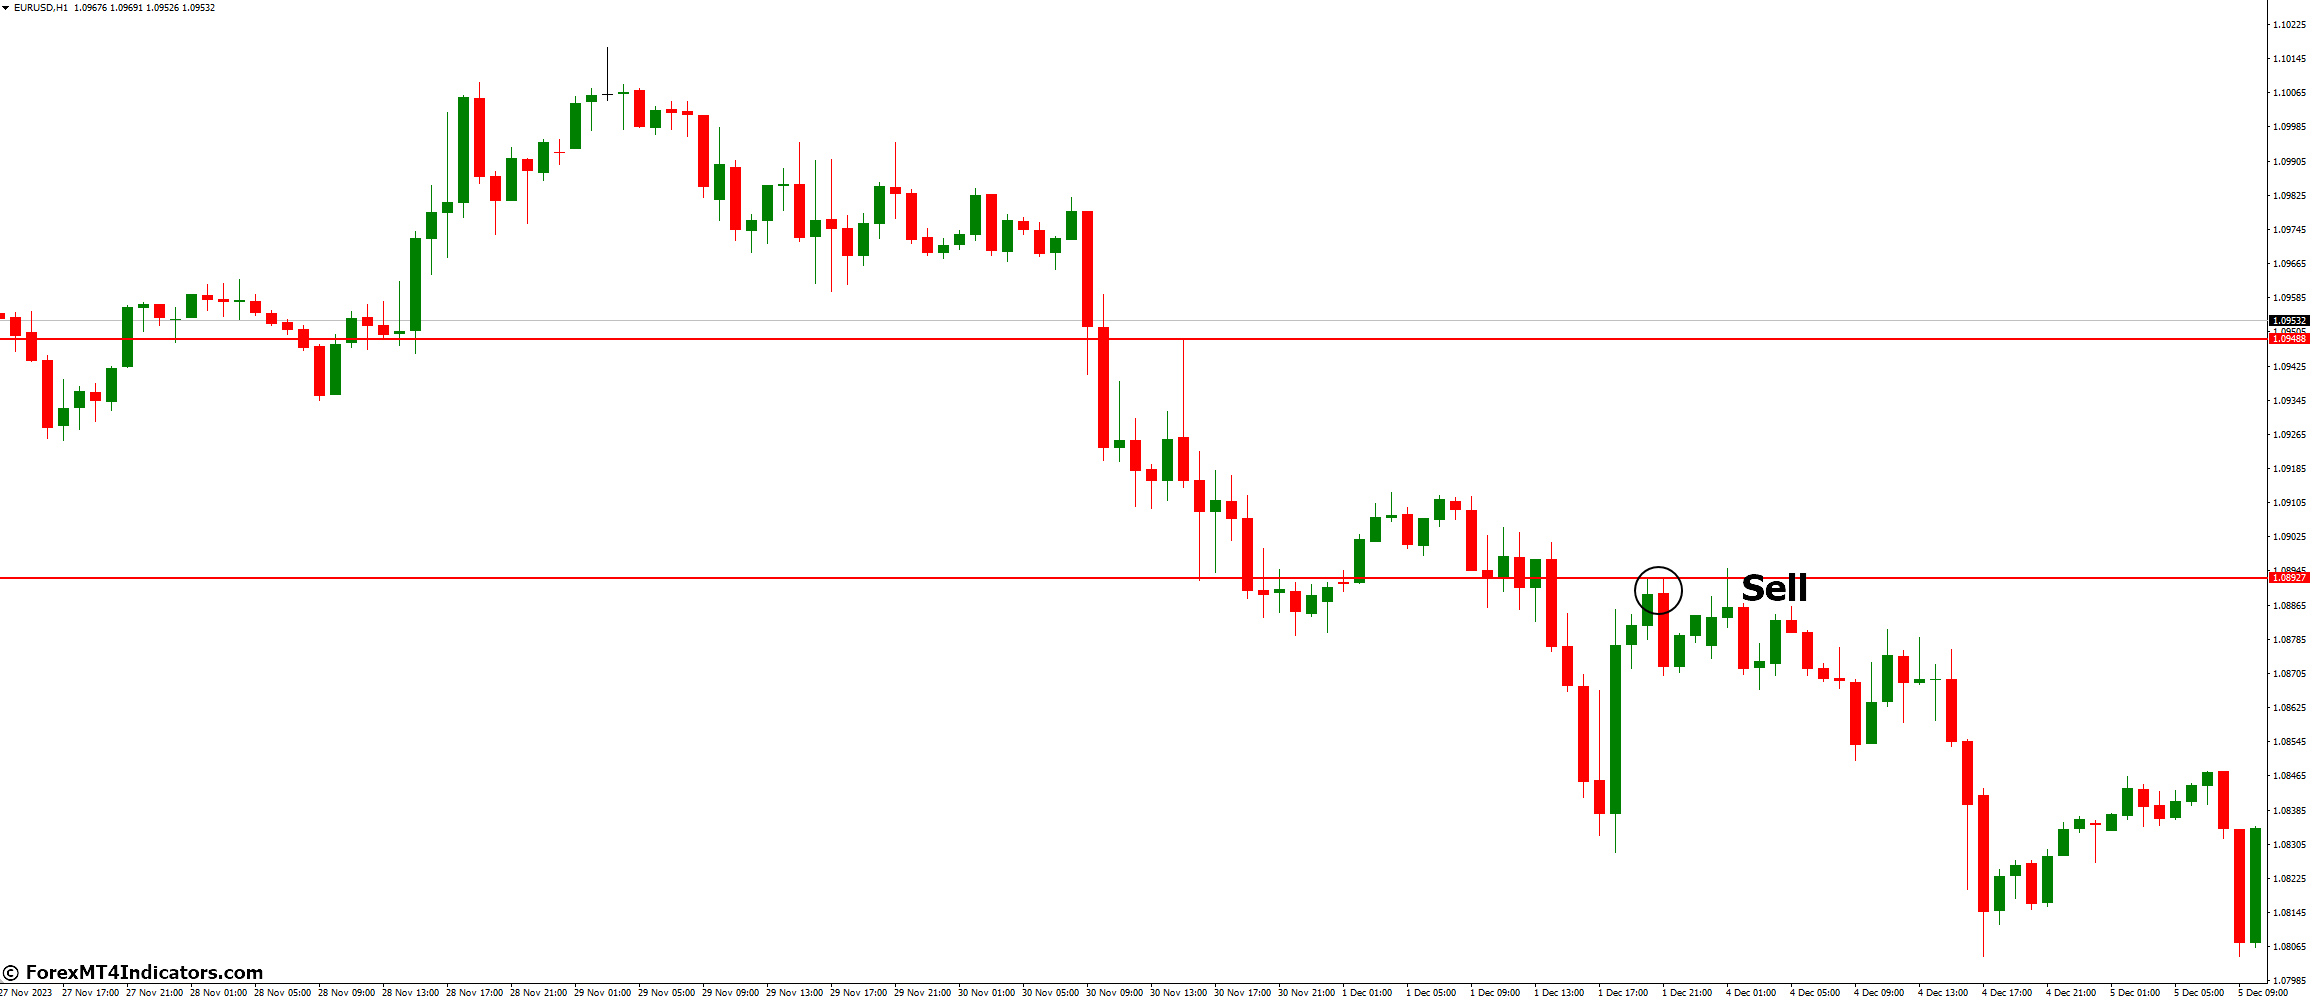 How to Trade with Daily Range Indicator - Sell Entry